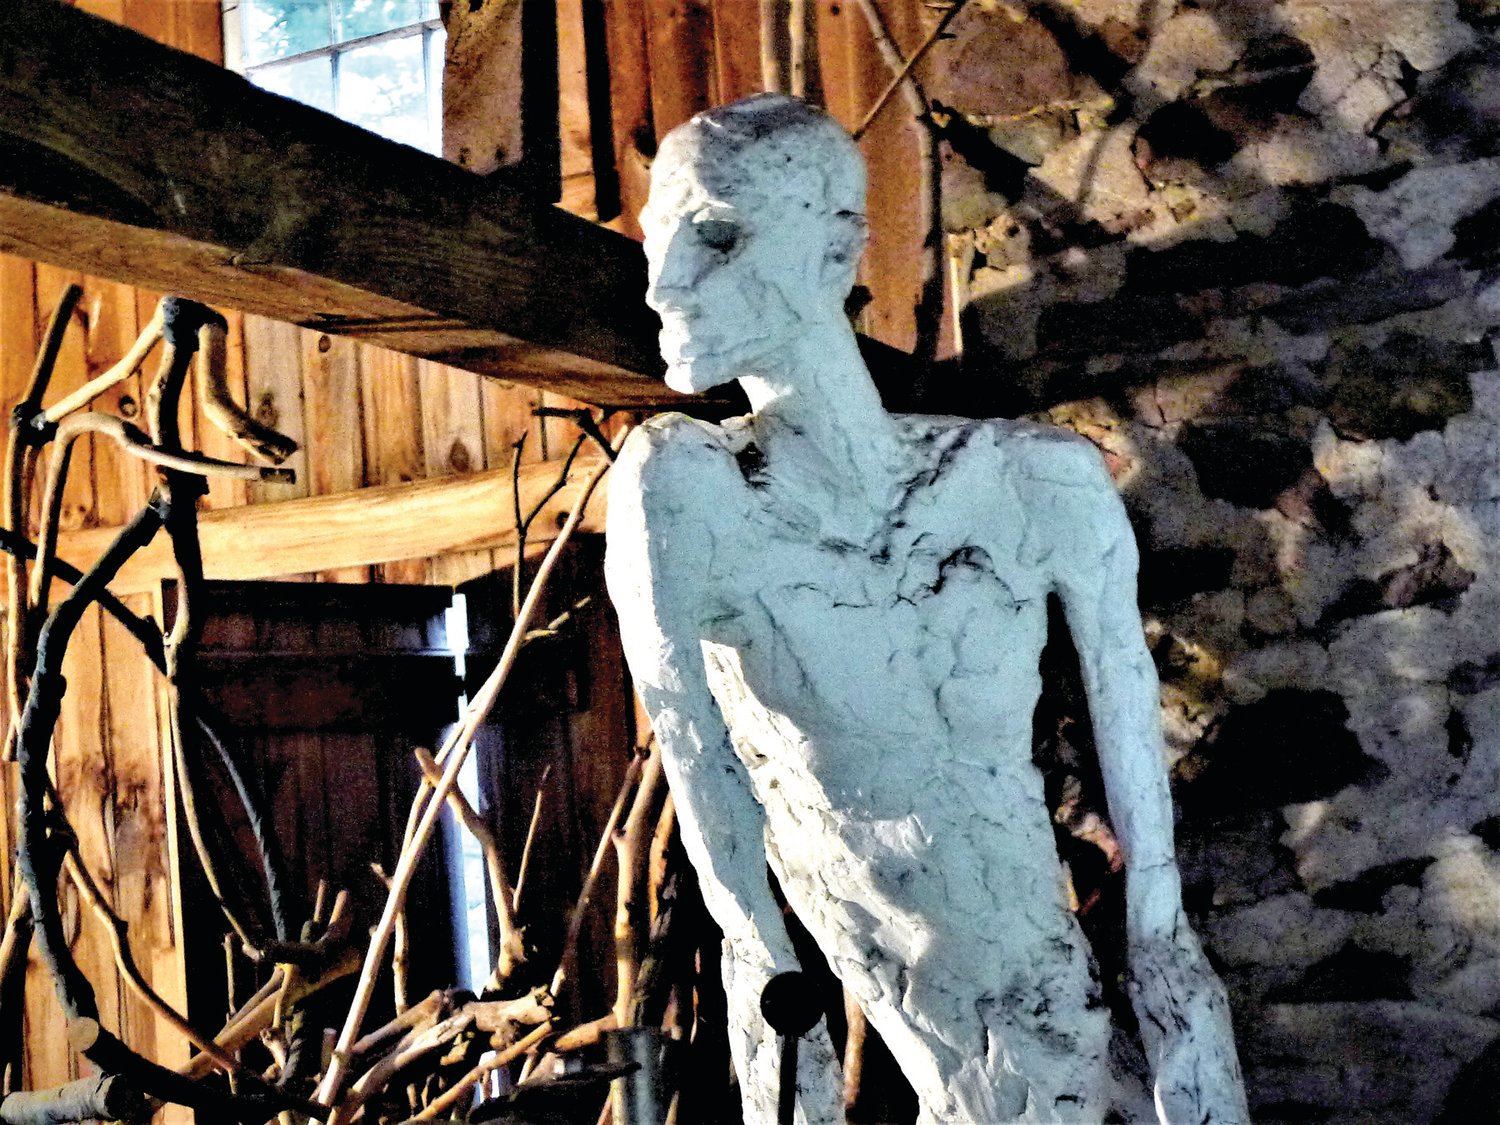 Nura Petrov’s sculptures will be on view both inside her barn and outdoors.